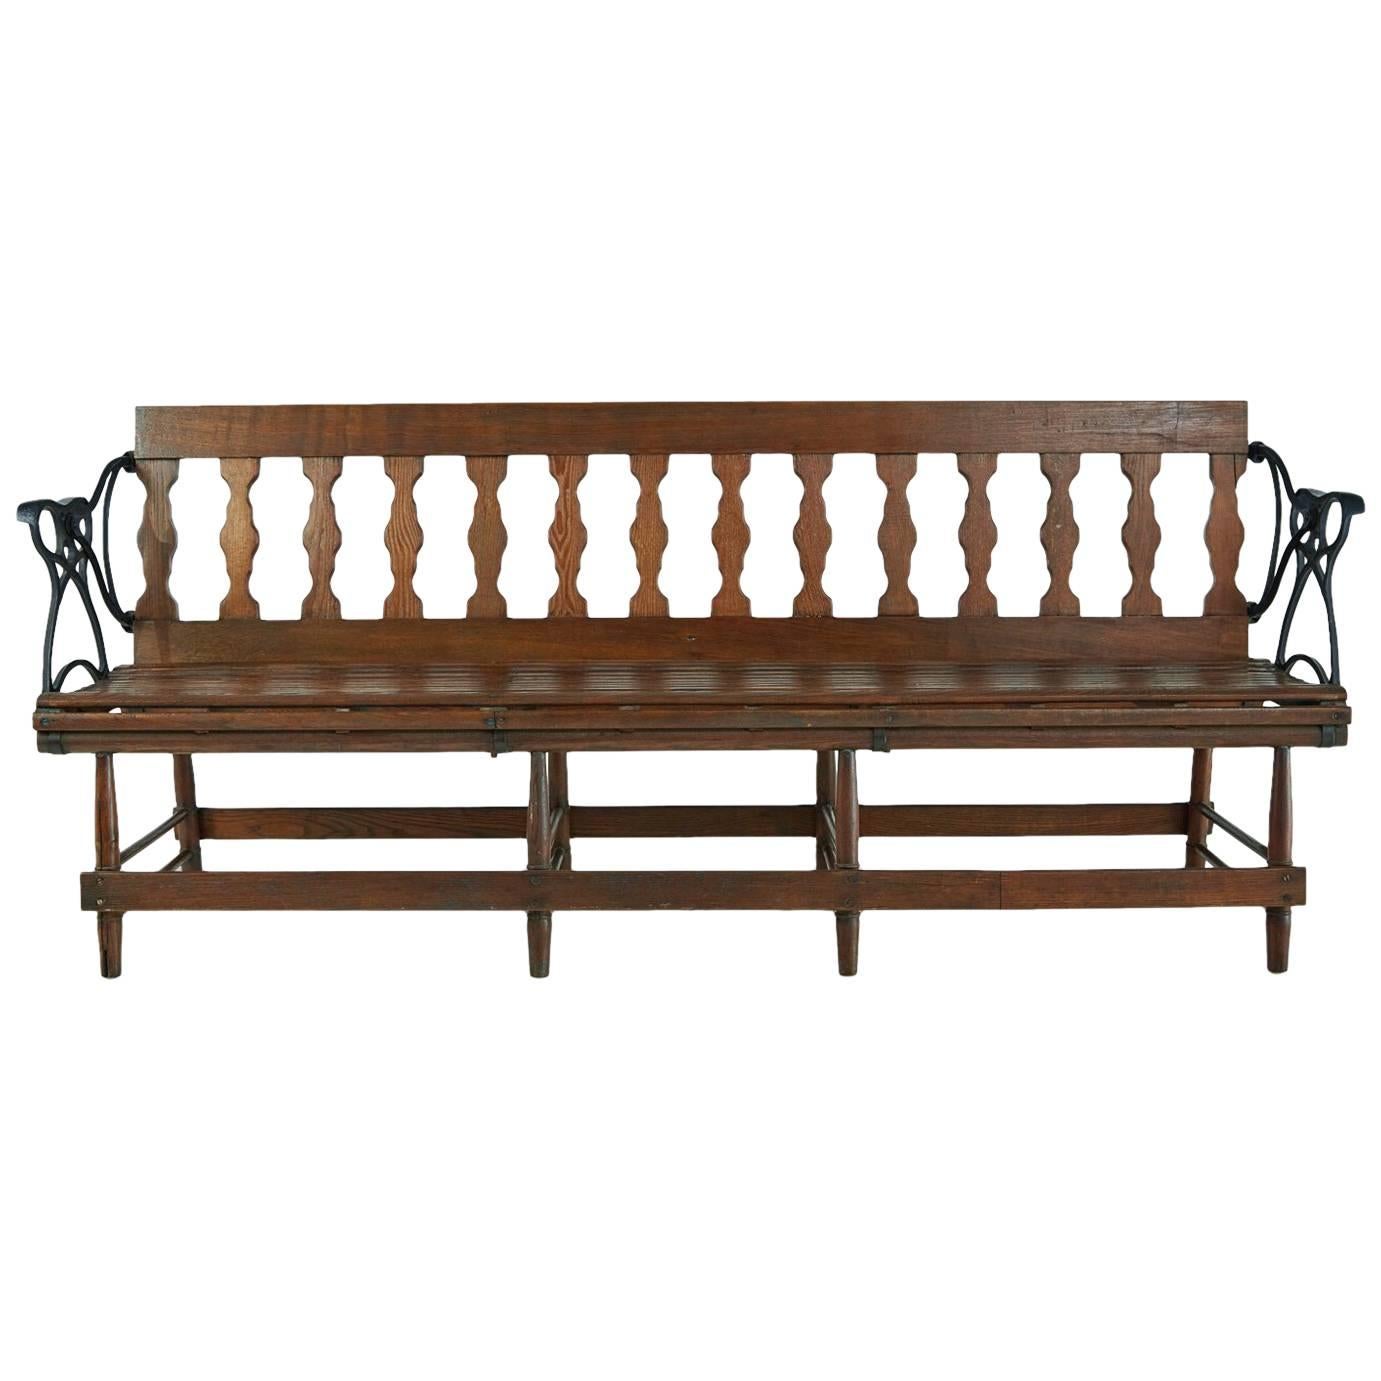 Victorian Wood and Iron Reversible Railway Bench